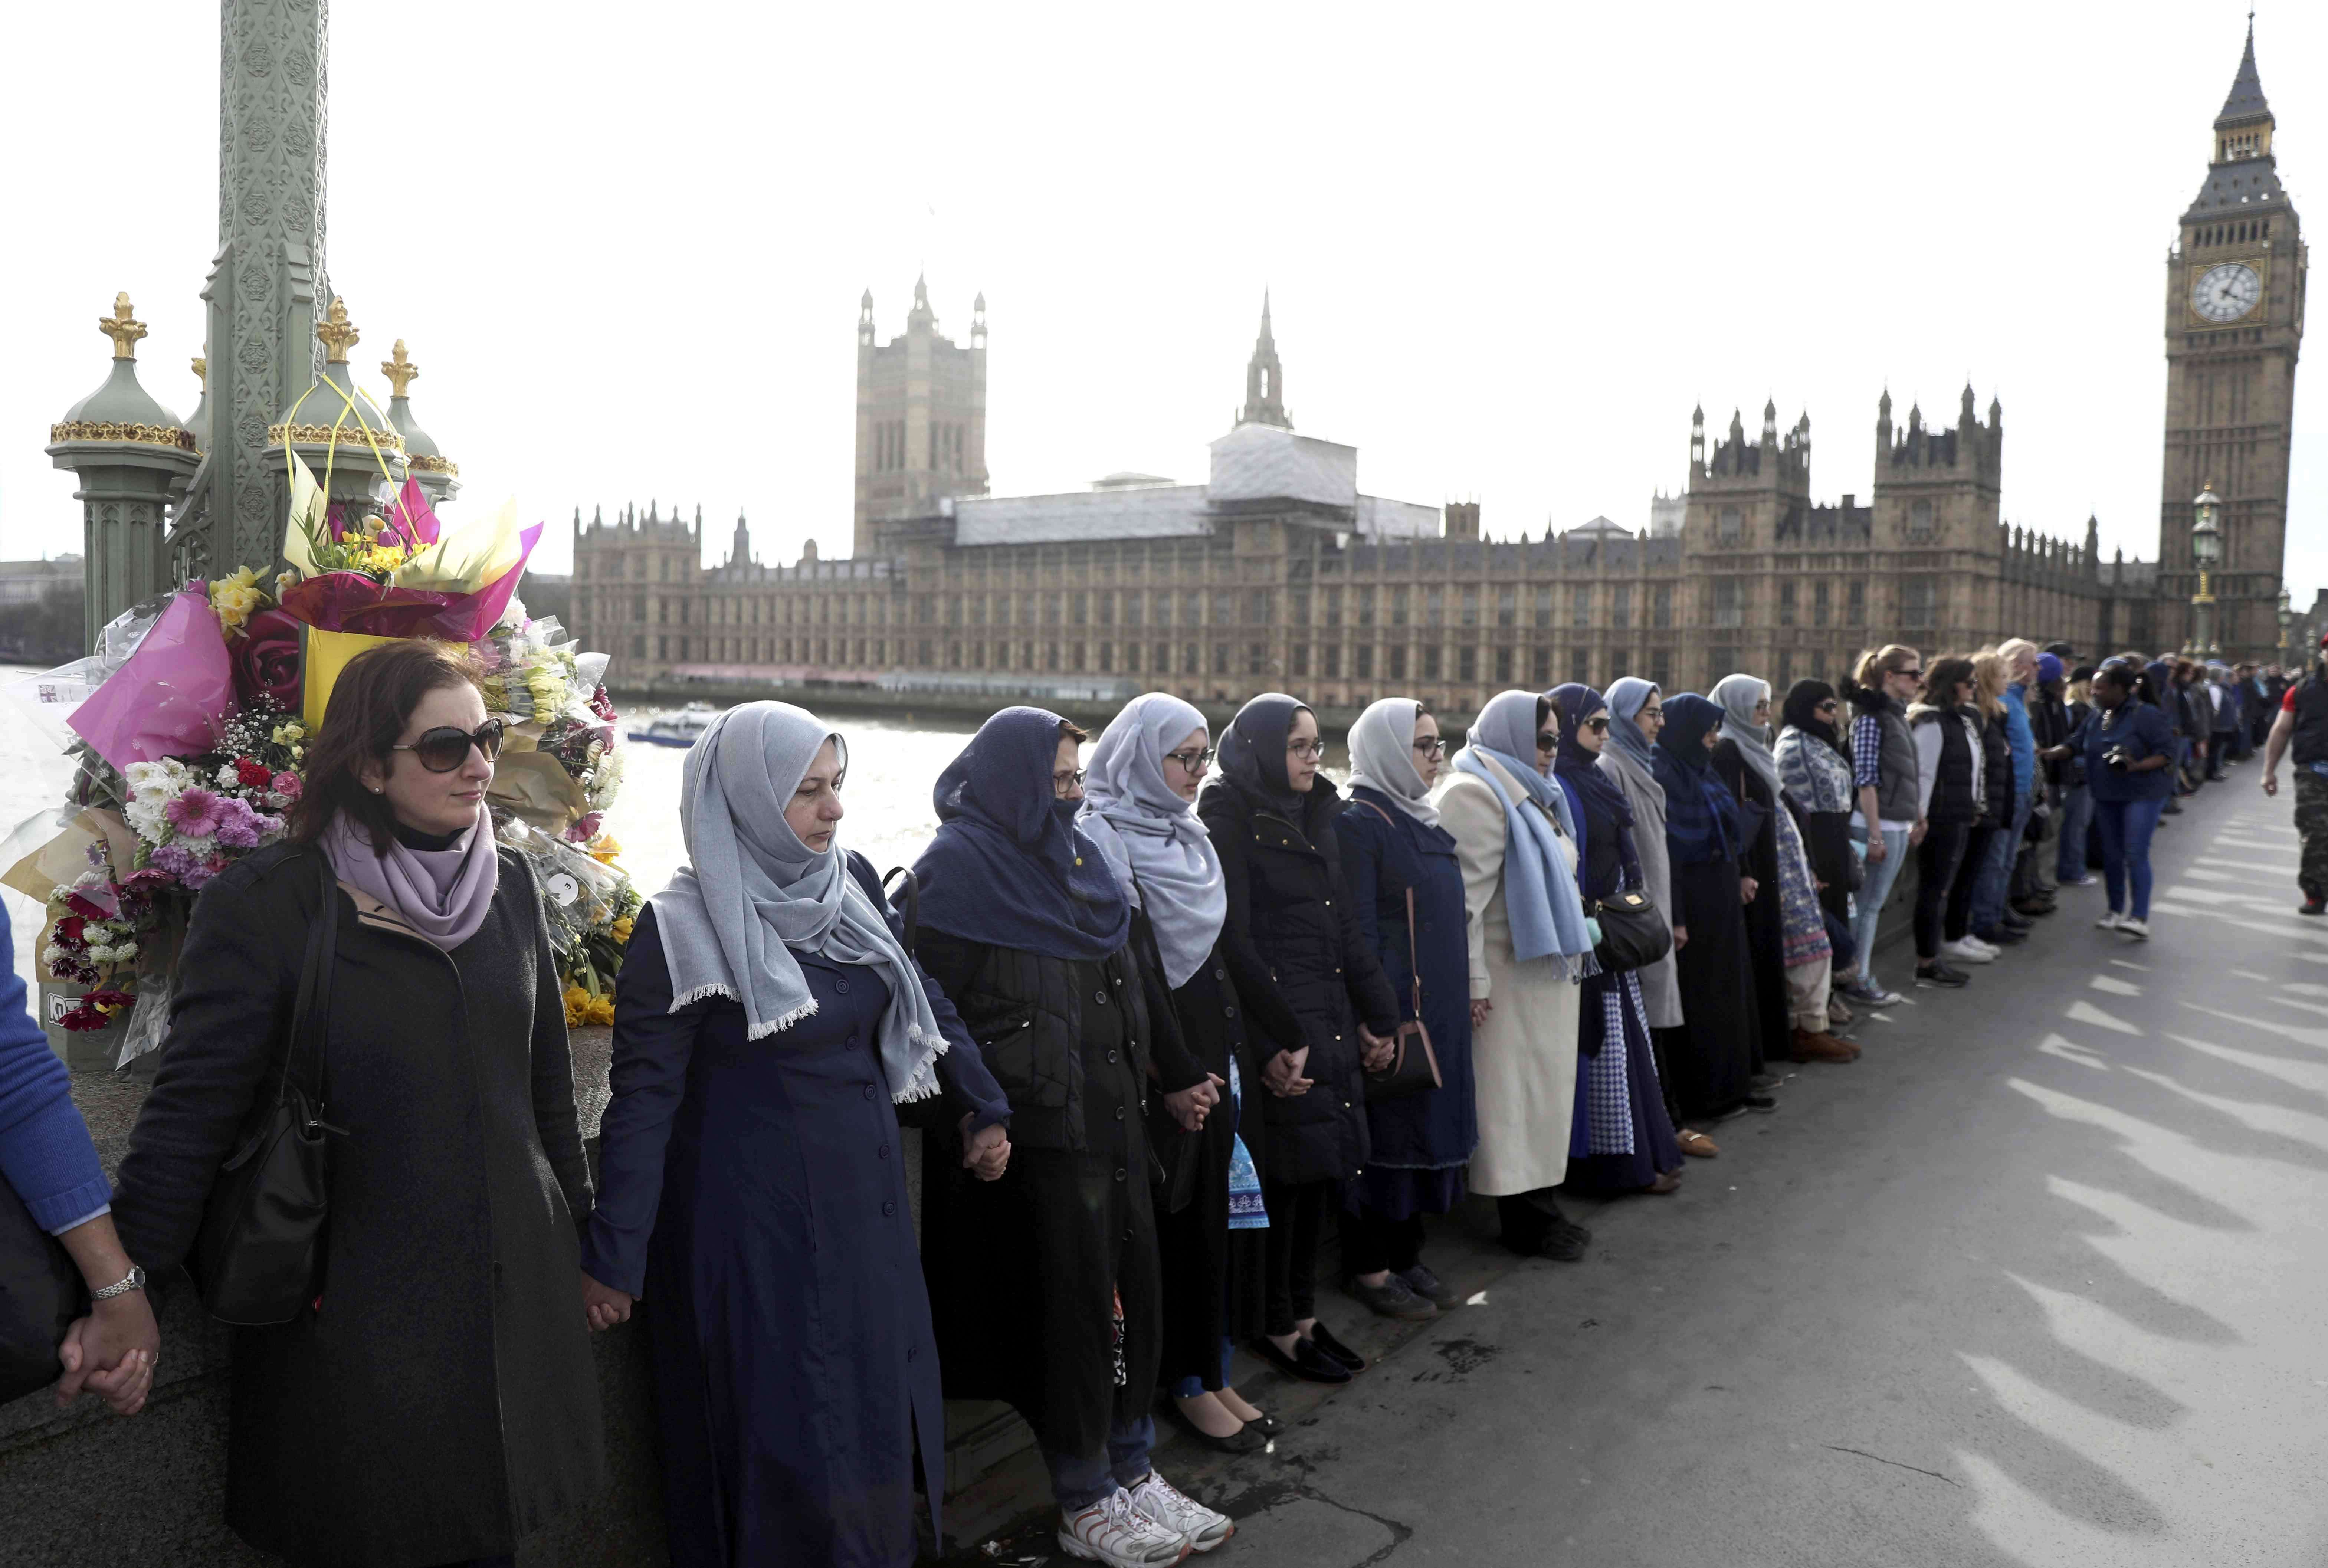 Participants in the Women's March, gather on Westminster Bridge to hold hands in silence, to remember victims of the attack in Westminster earlier in the week, in London on Sunday. Photo: Reuters